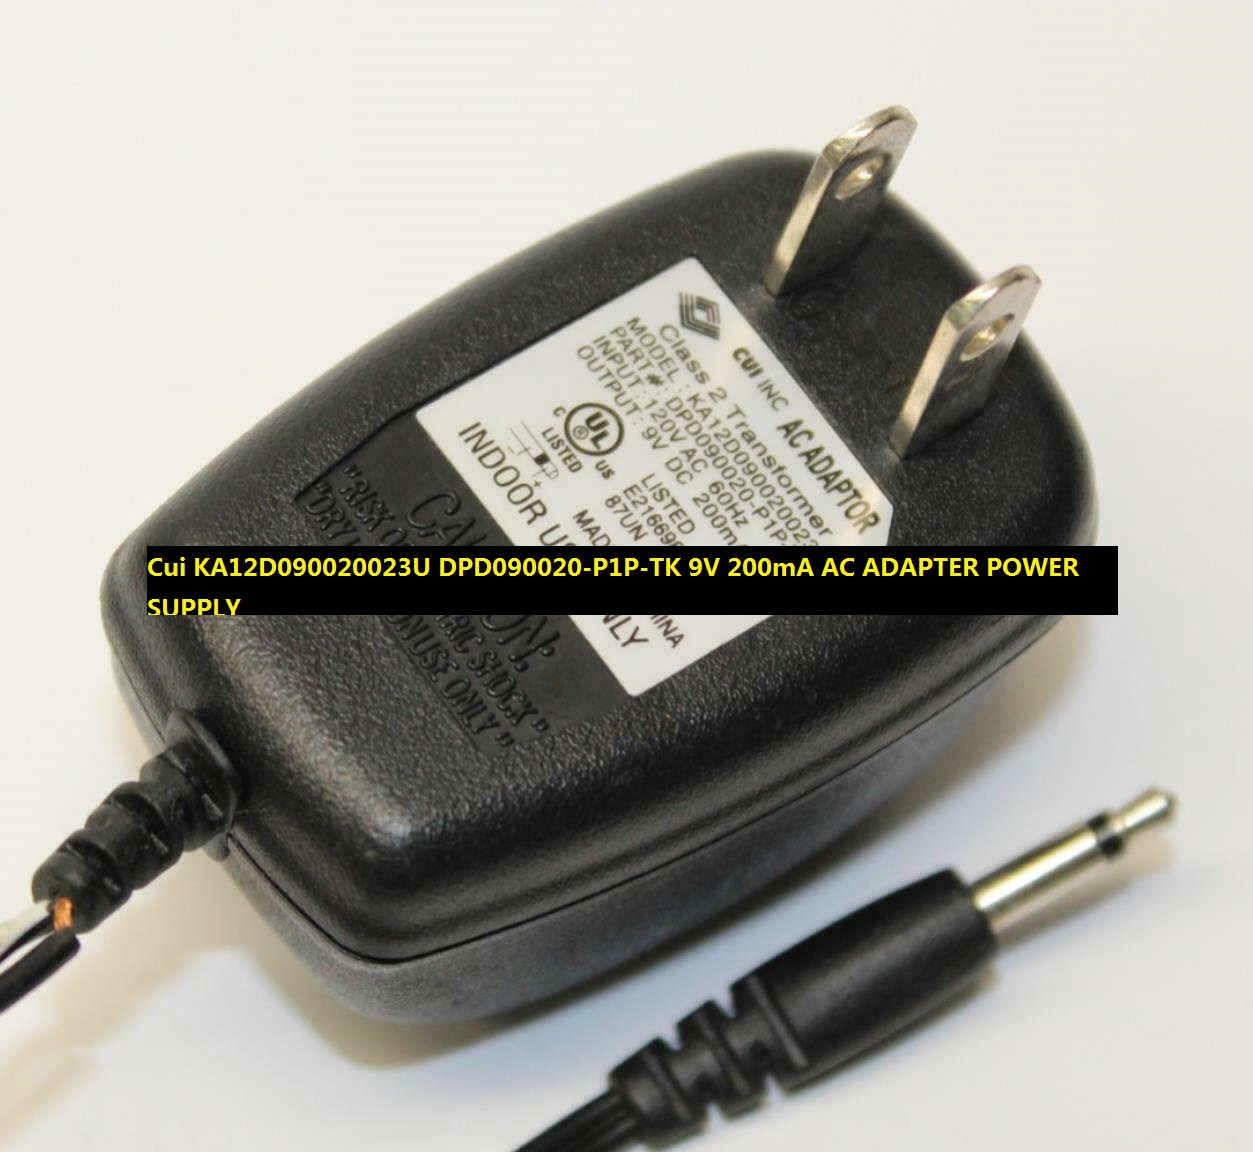 *100% Brand NEW* 9V 200mA AC ADAPTER Cui KA12D090020023U DPD090020-P1P-TK POWER SUPPLY - Click Image to Close